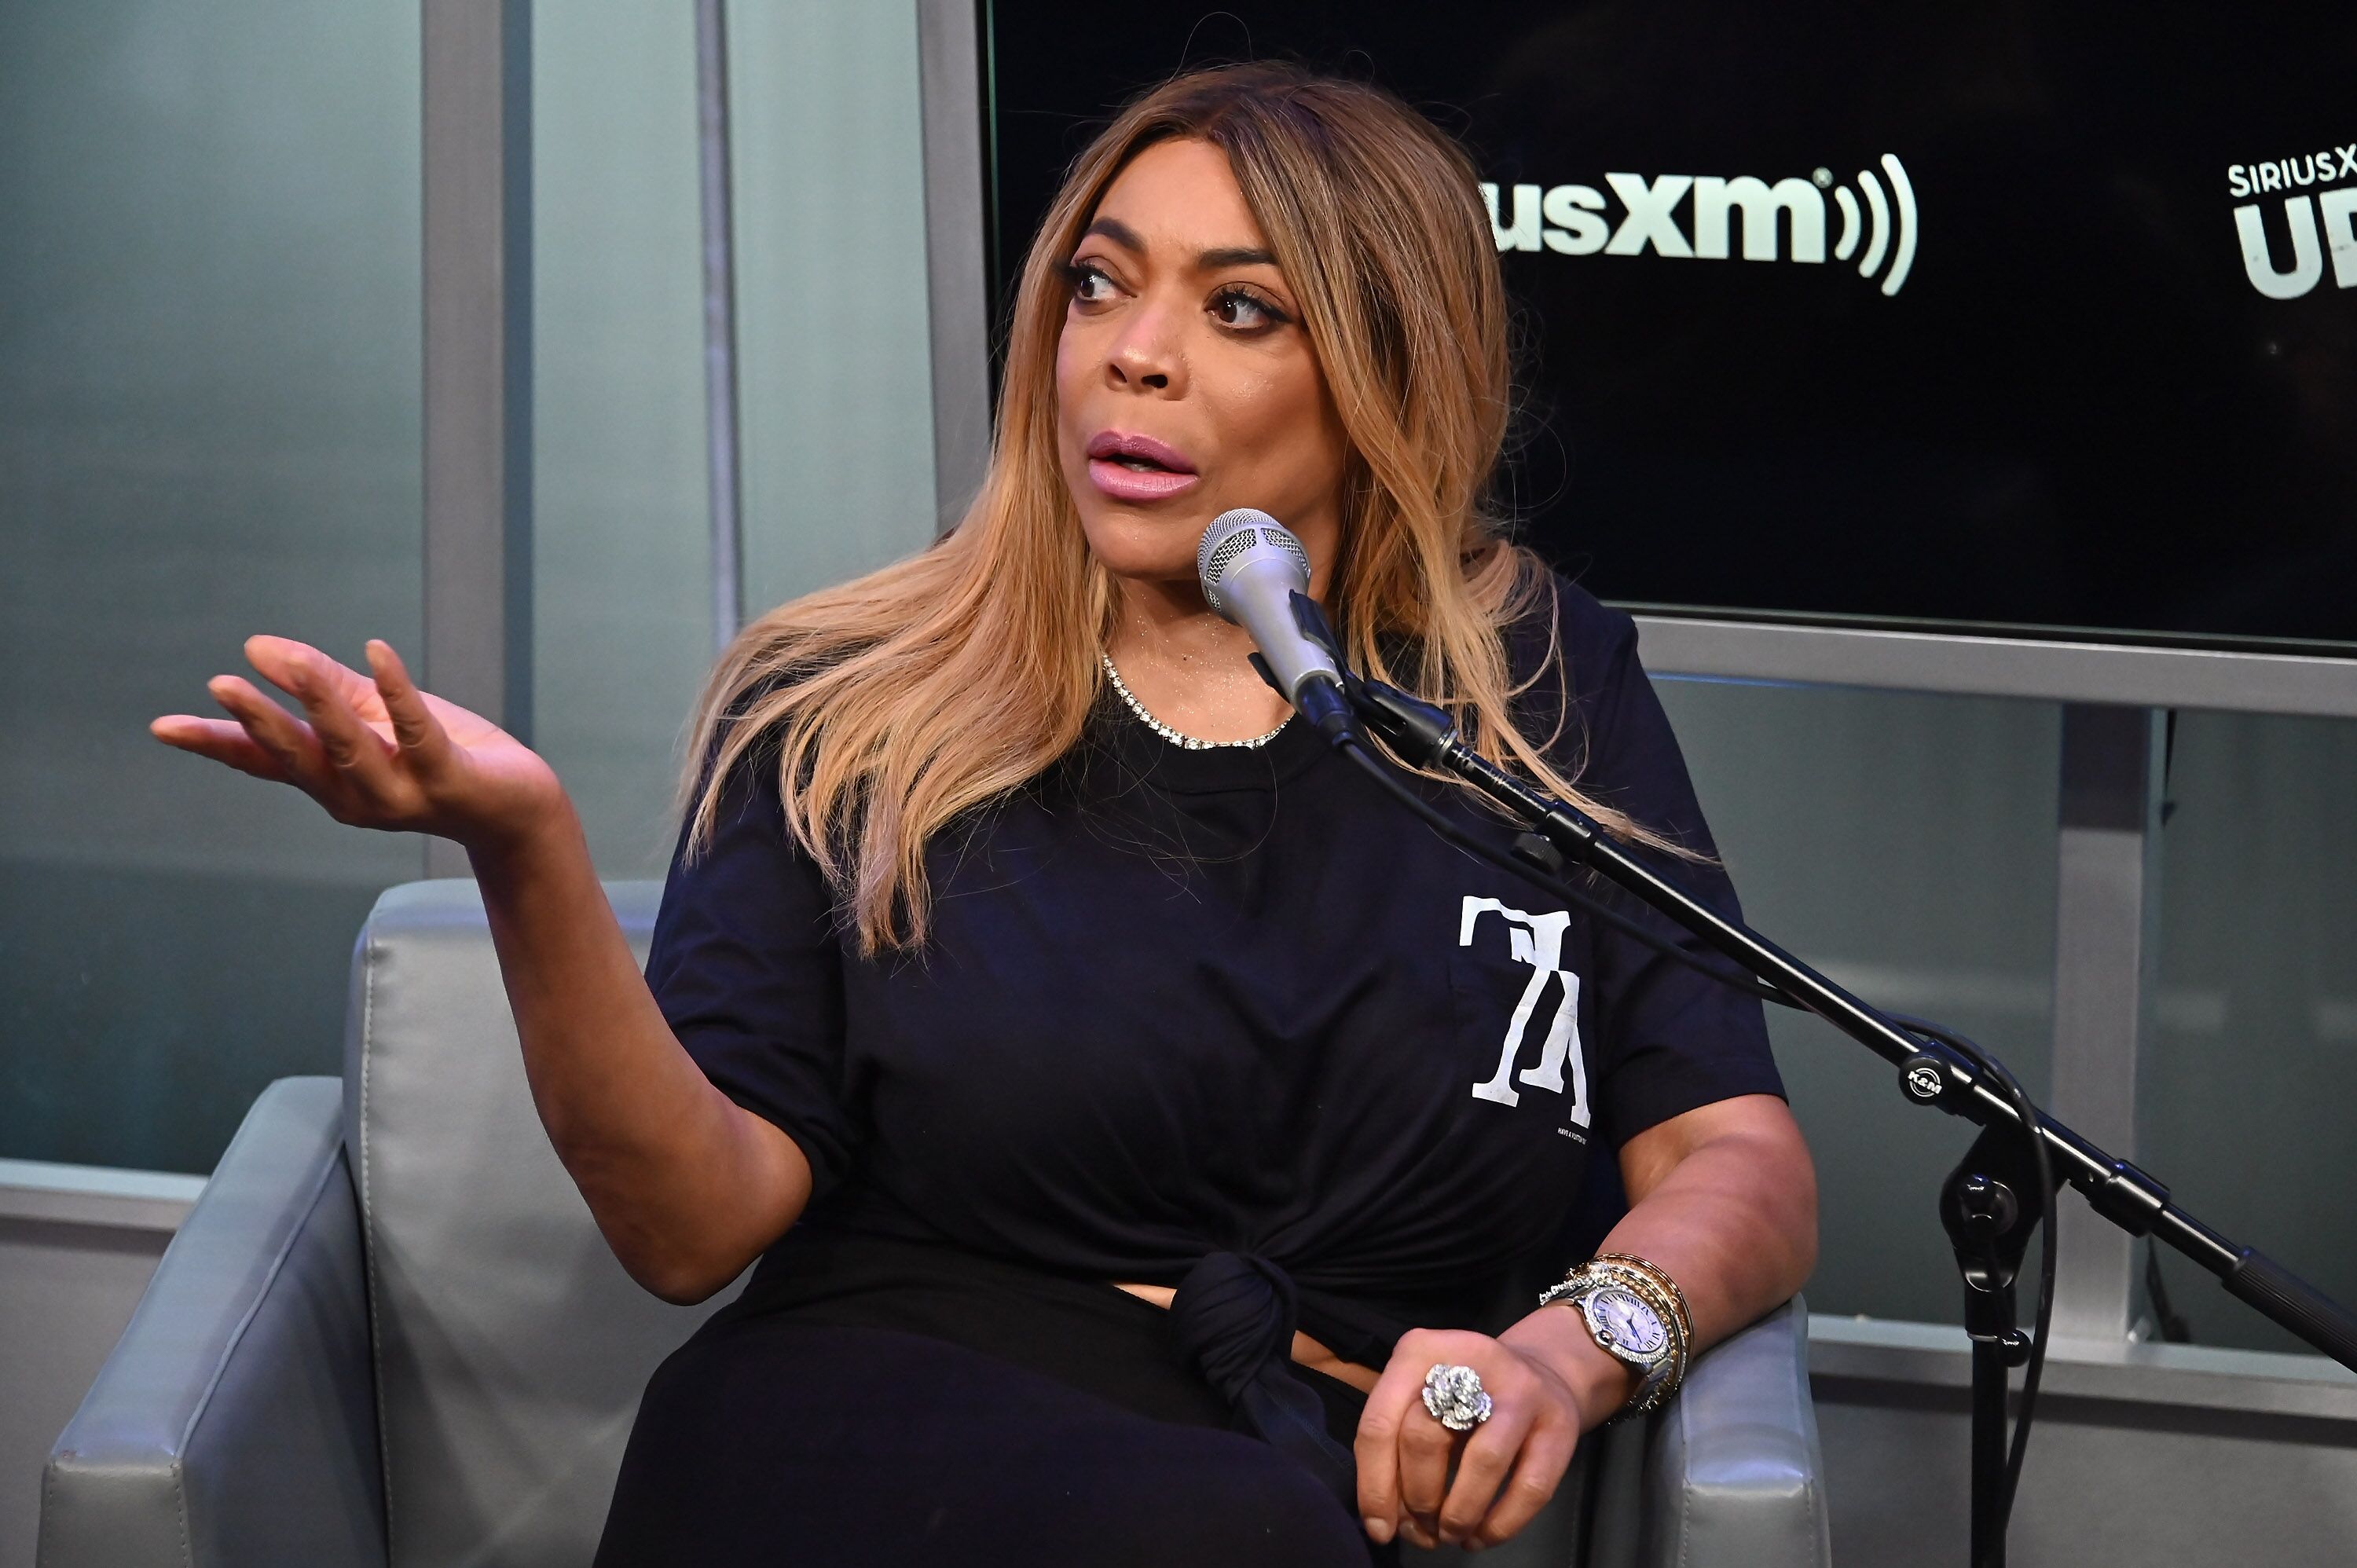 Wendy Williams at SiriusXM Town Hall on July 23, 2019, in New York City | Photo: Astrid Stawiarz/Getty Images